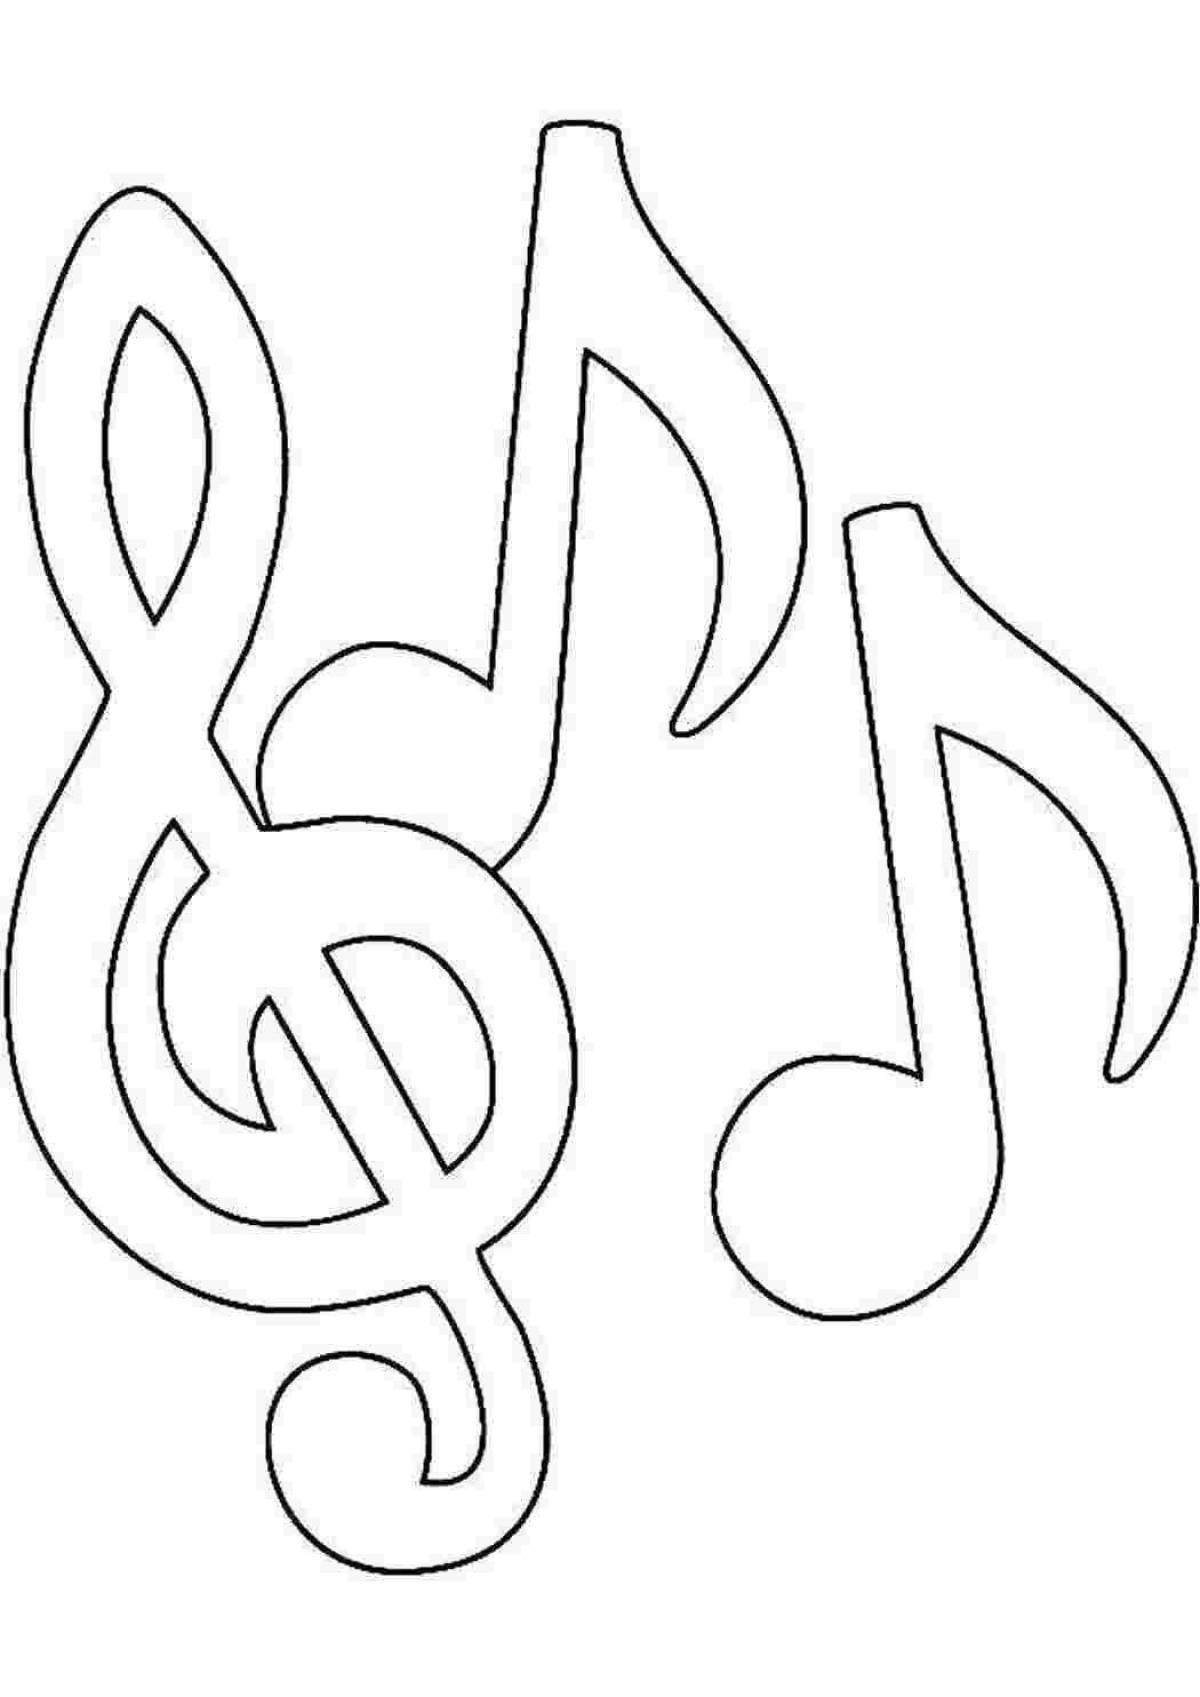 Swinging musical note coloring page